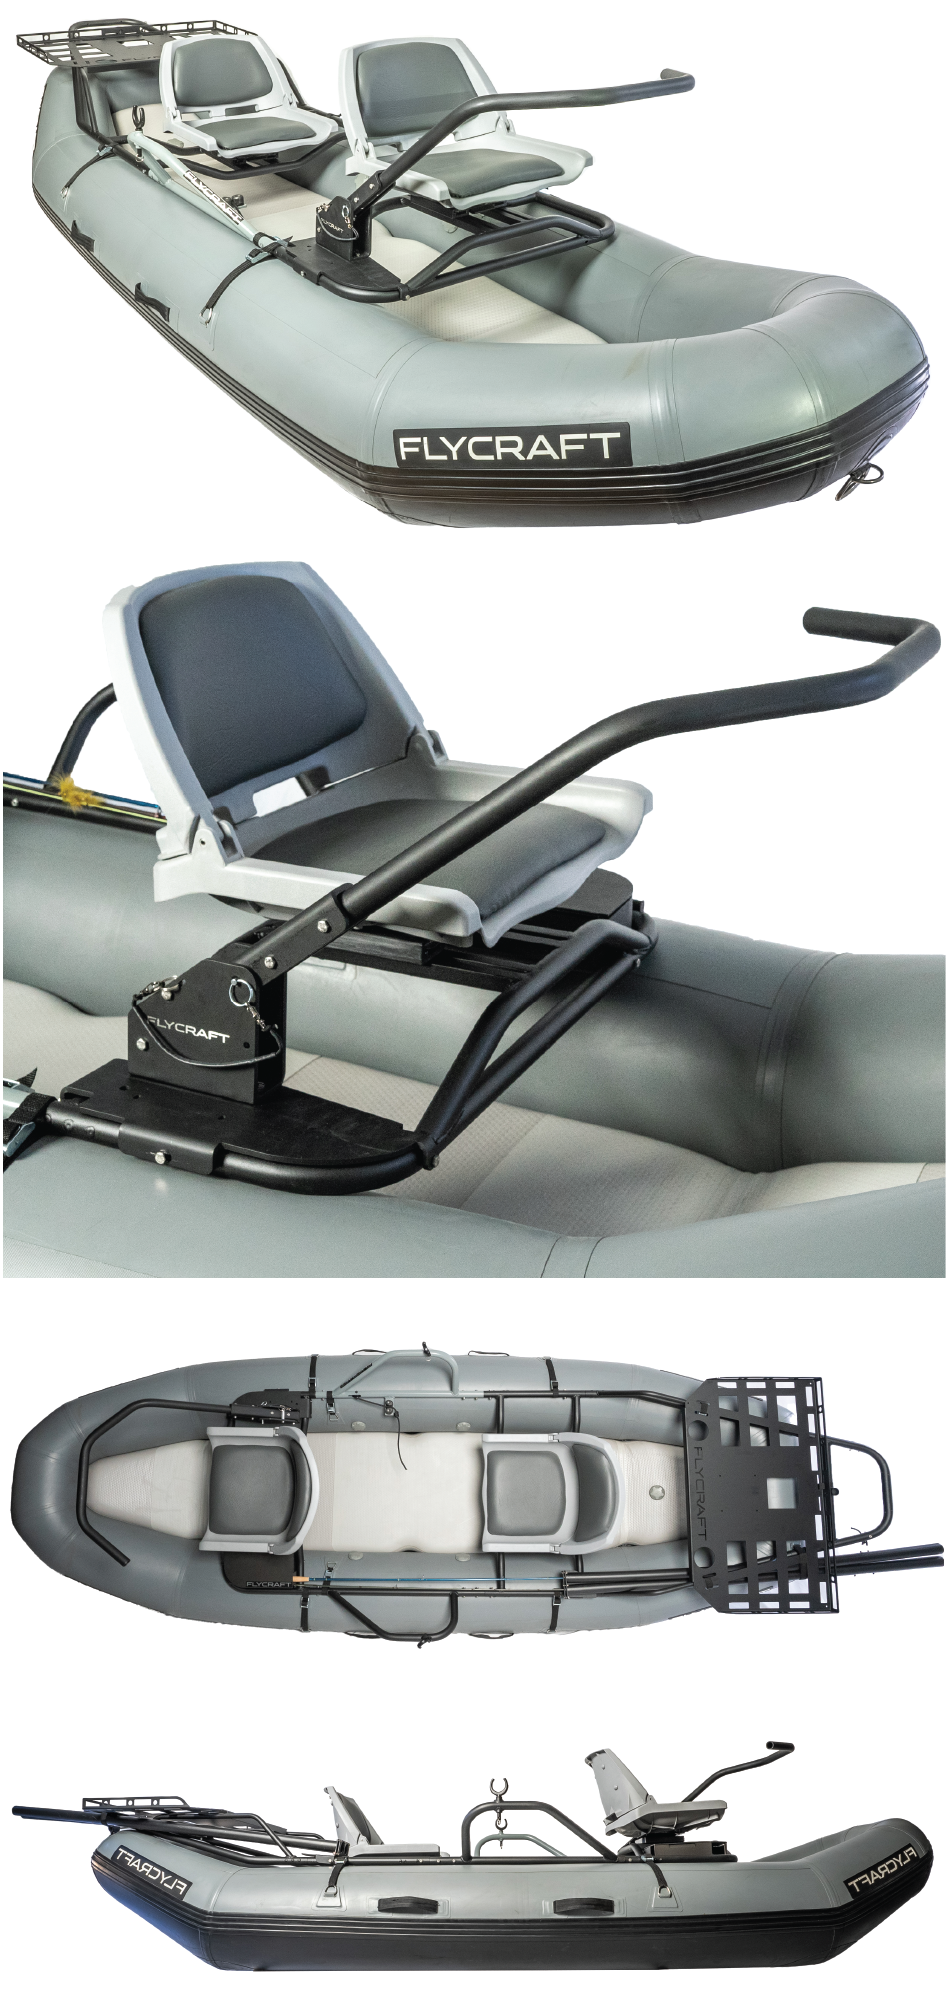 Fishing Inflatable Boats & Parts  6-Person, 4-Person, 2-Person, 1-Person 